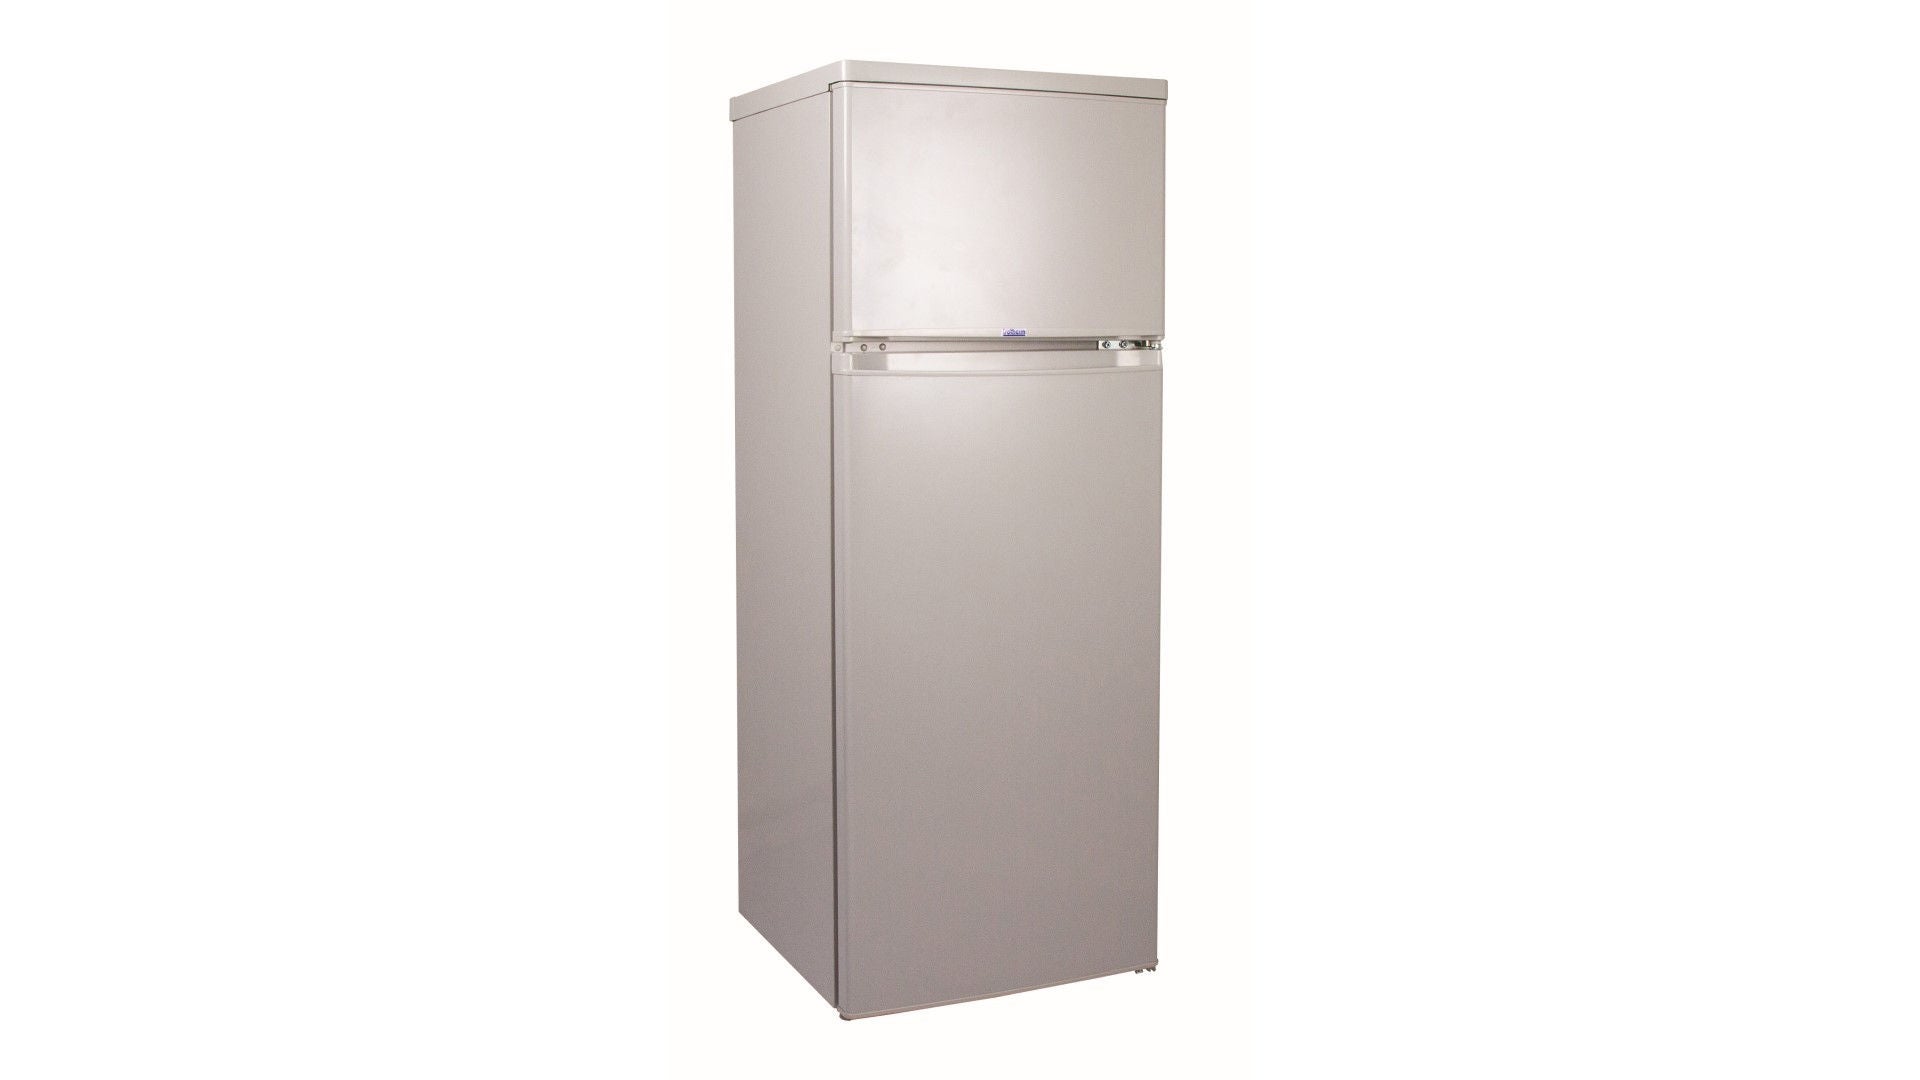 Product picture of Cruise Silver 225 fridge with closed door